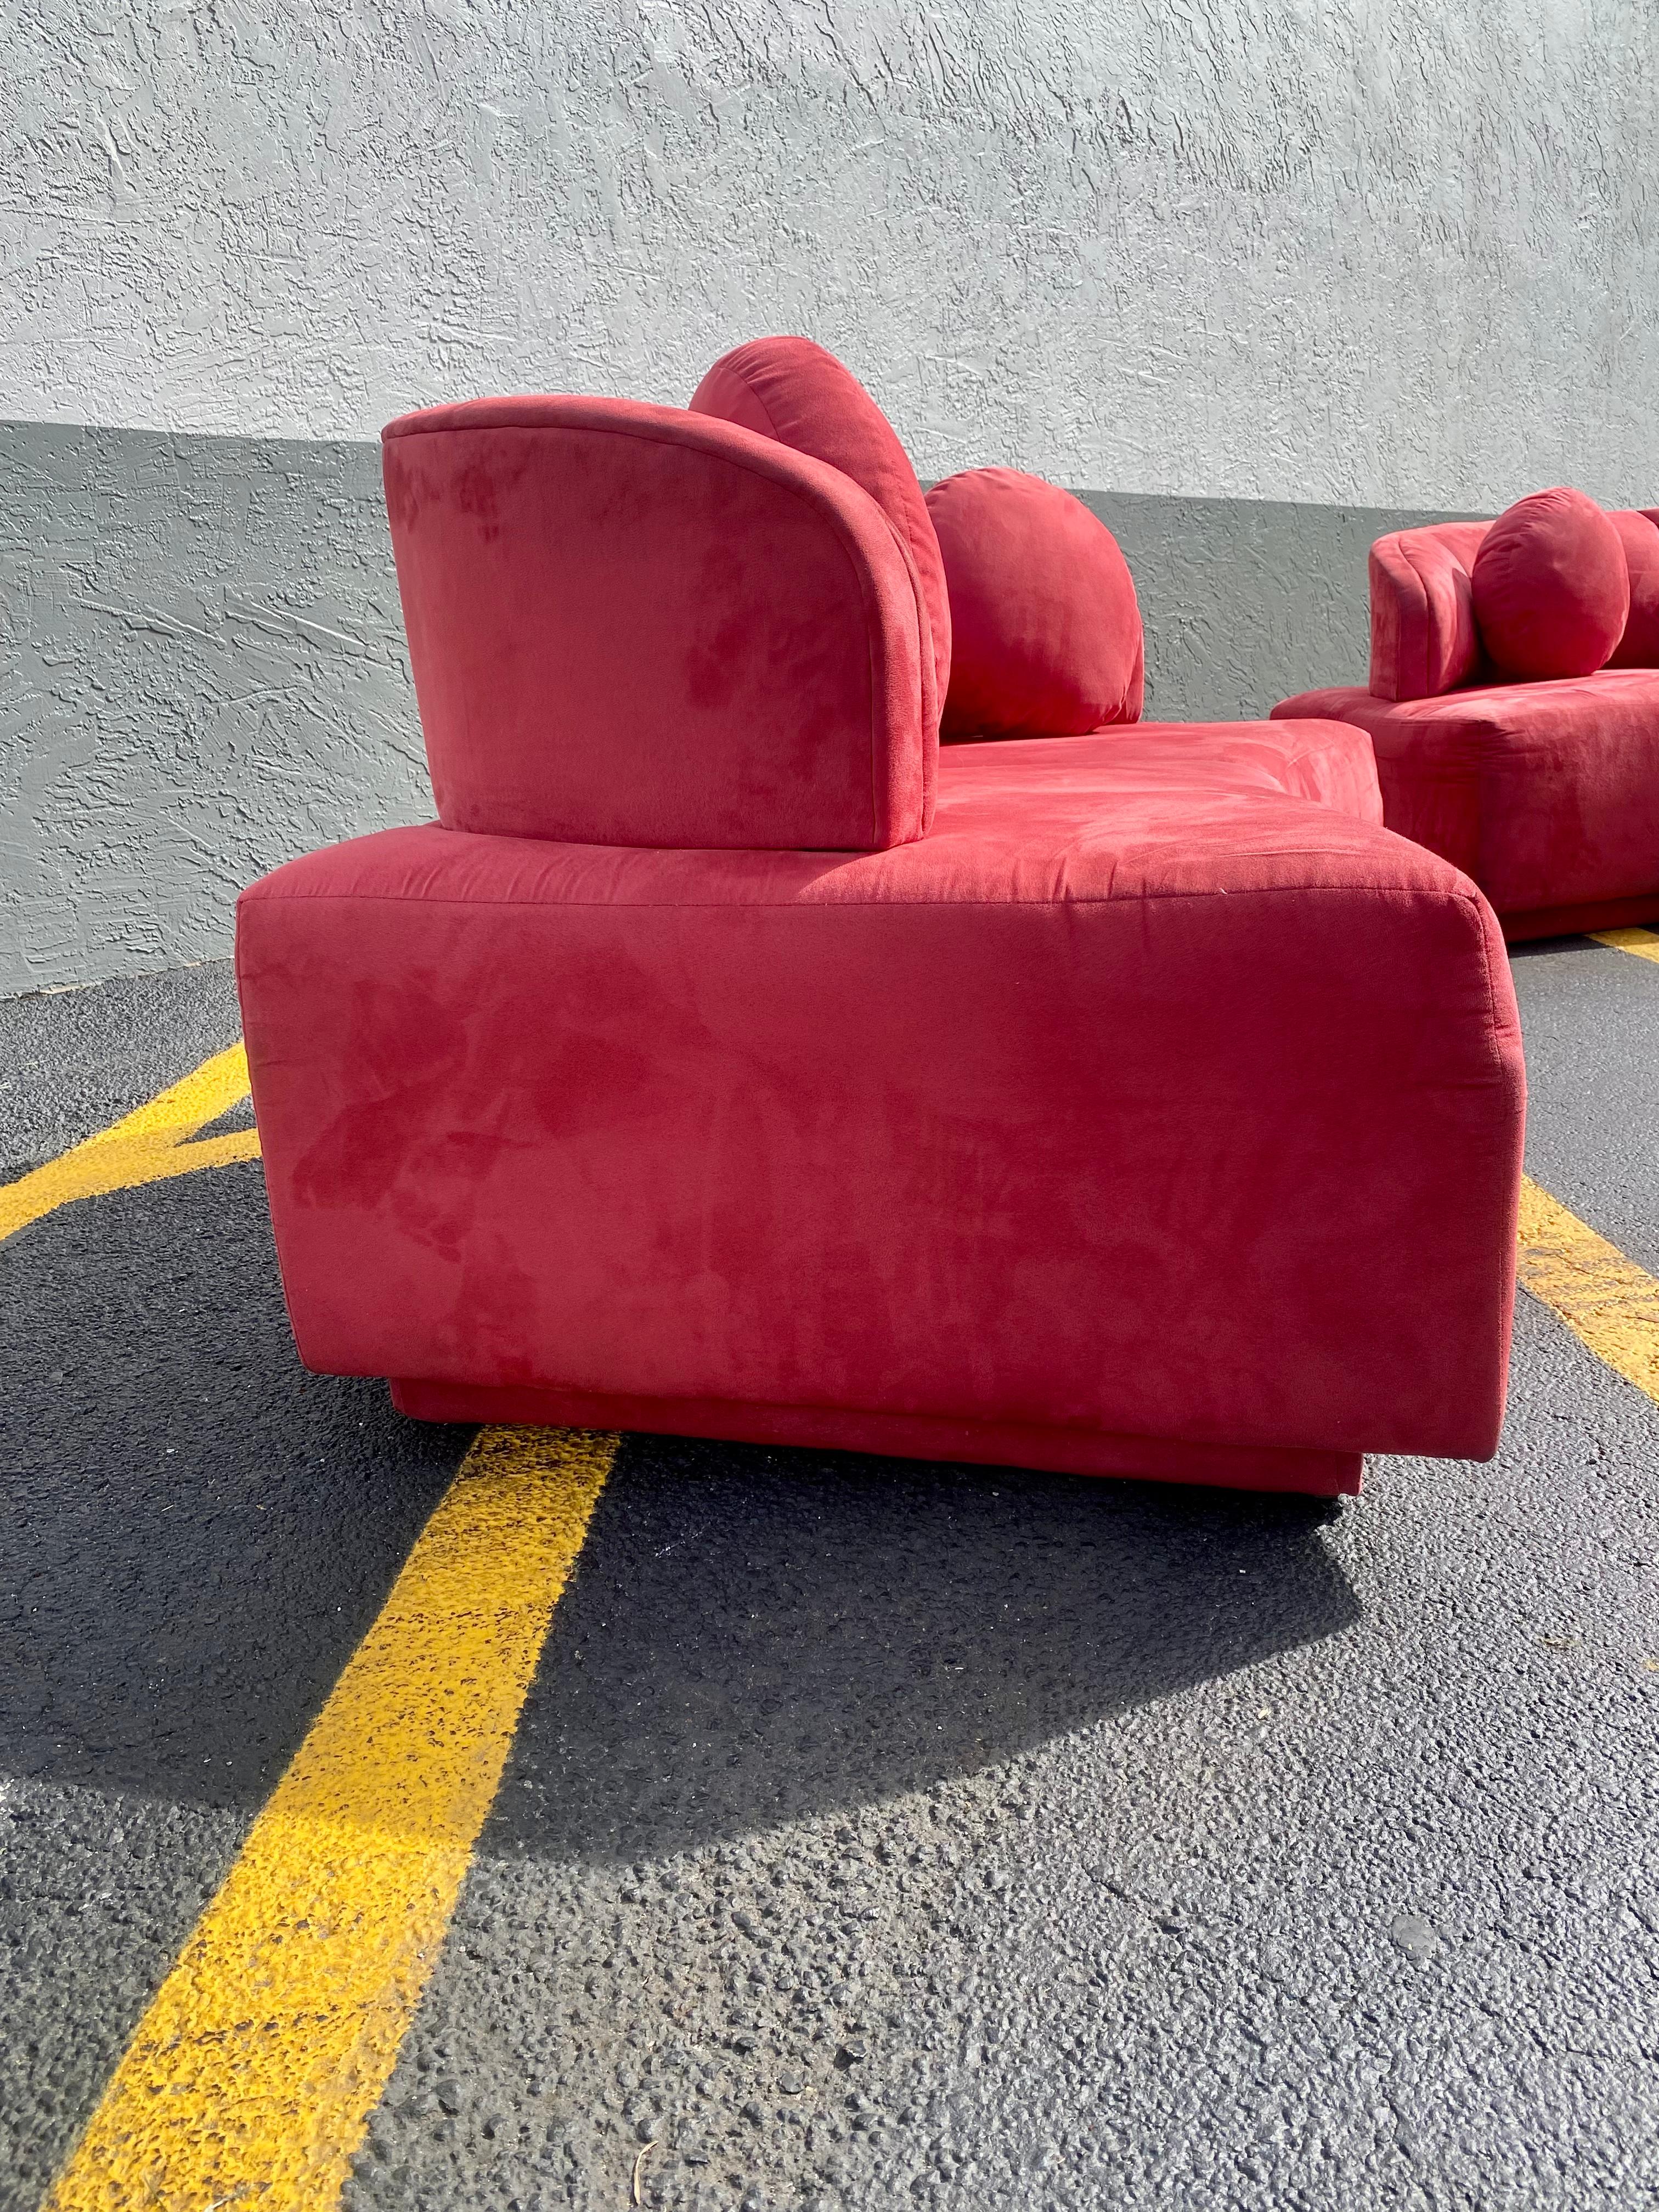 1980s Sculptural Weiman Red Cloud Sofa Loveseat, Set of 2 For Sale 1